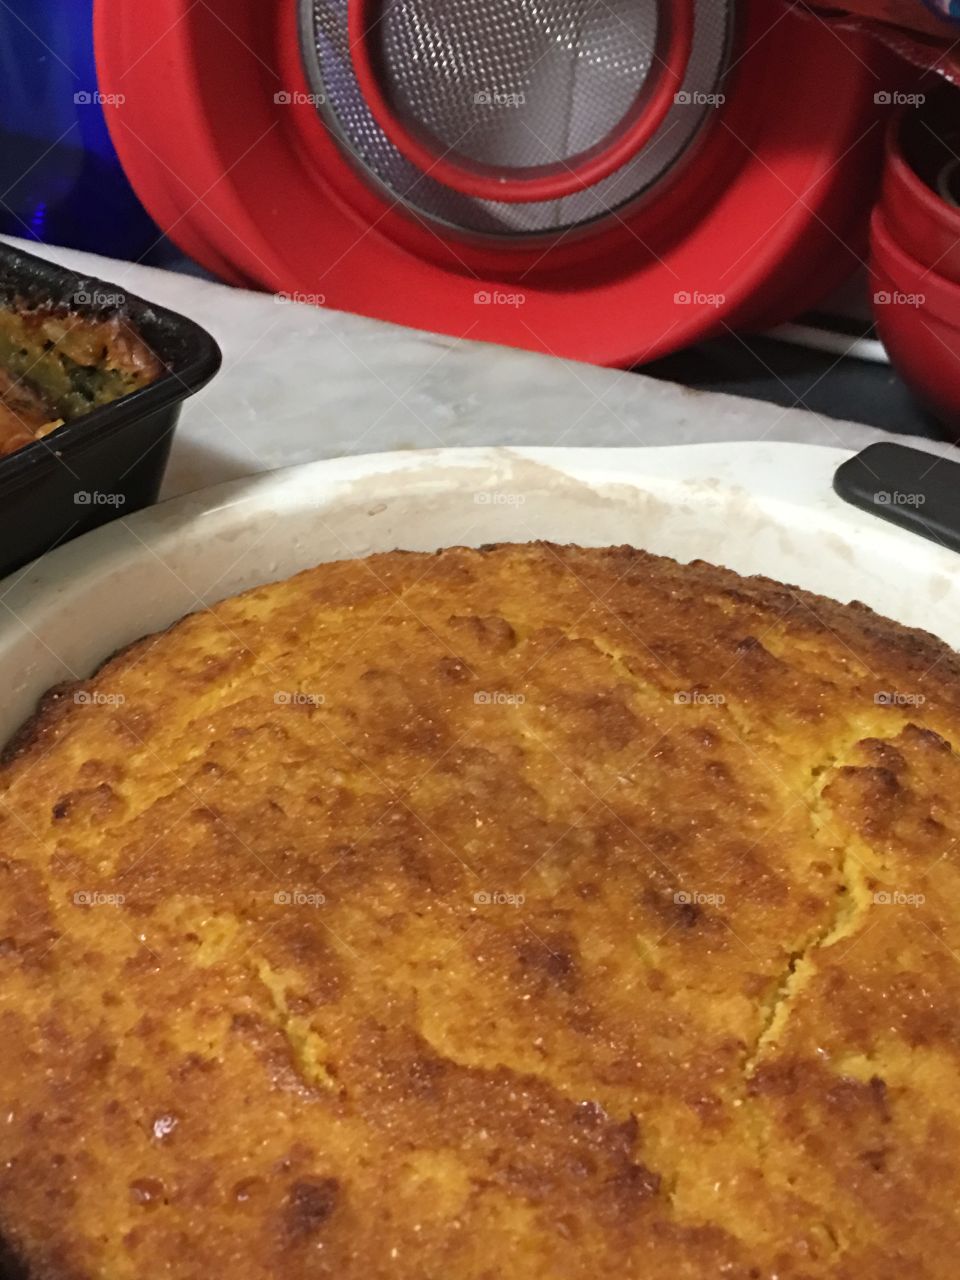 What's cooking? Homemade cornbread shown here in round baking pan closeup